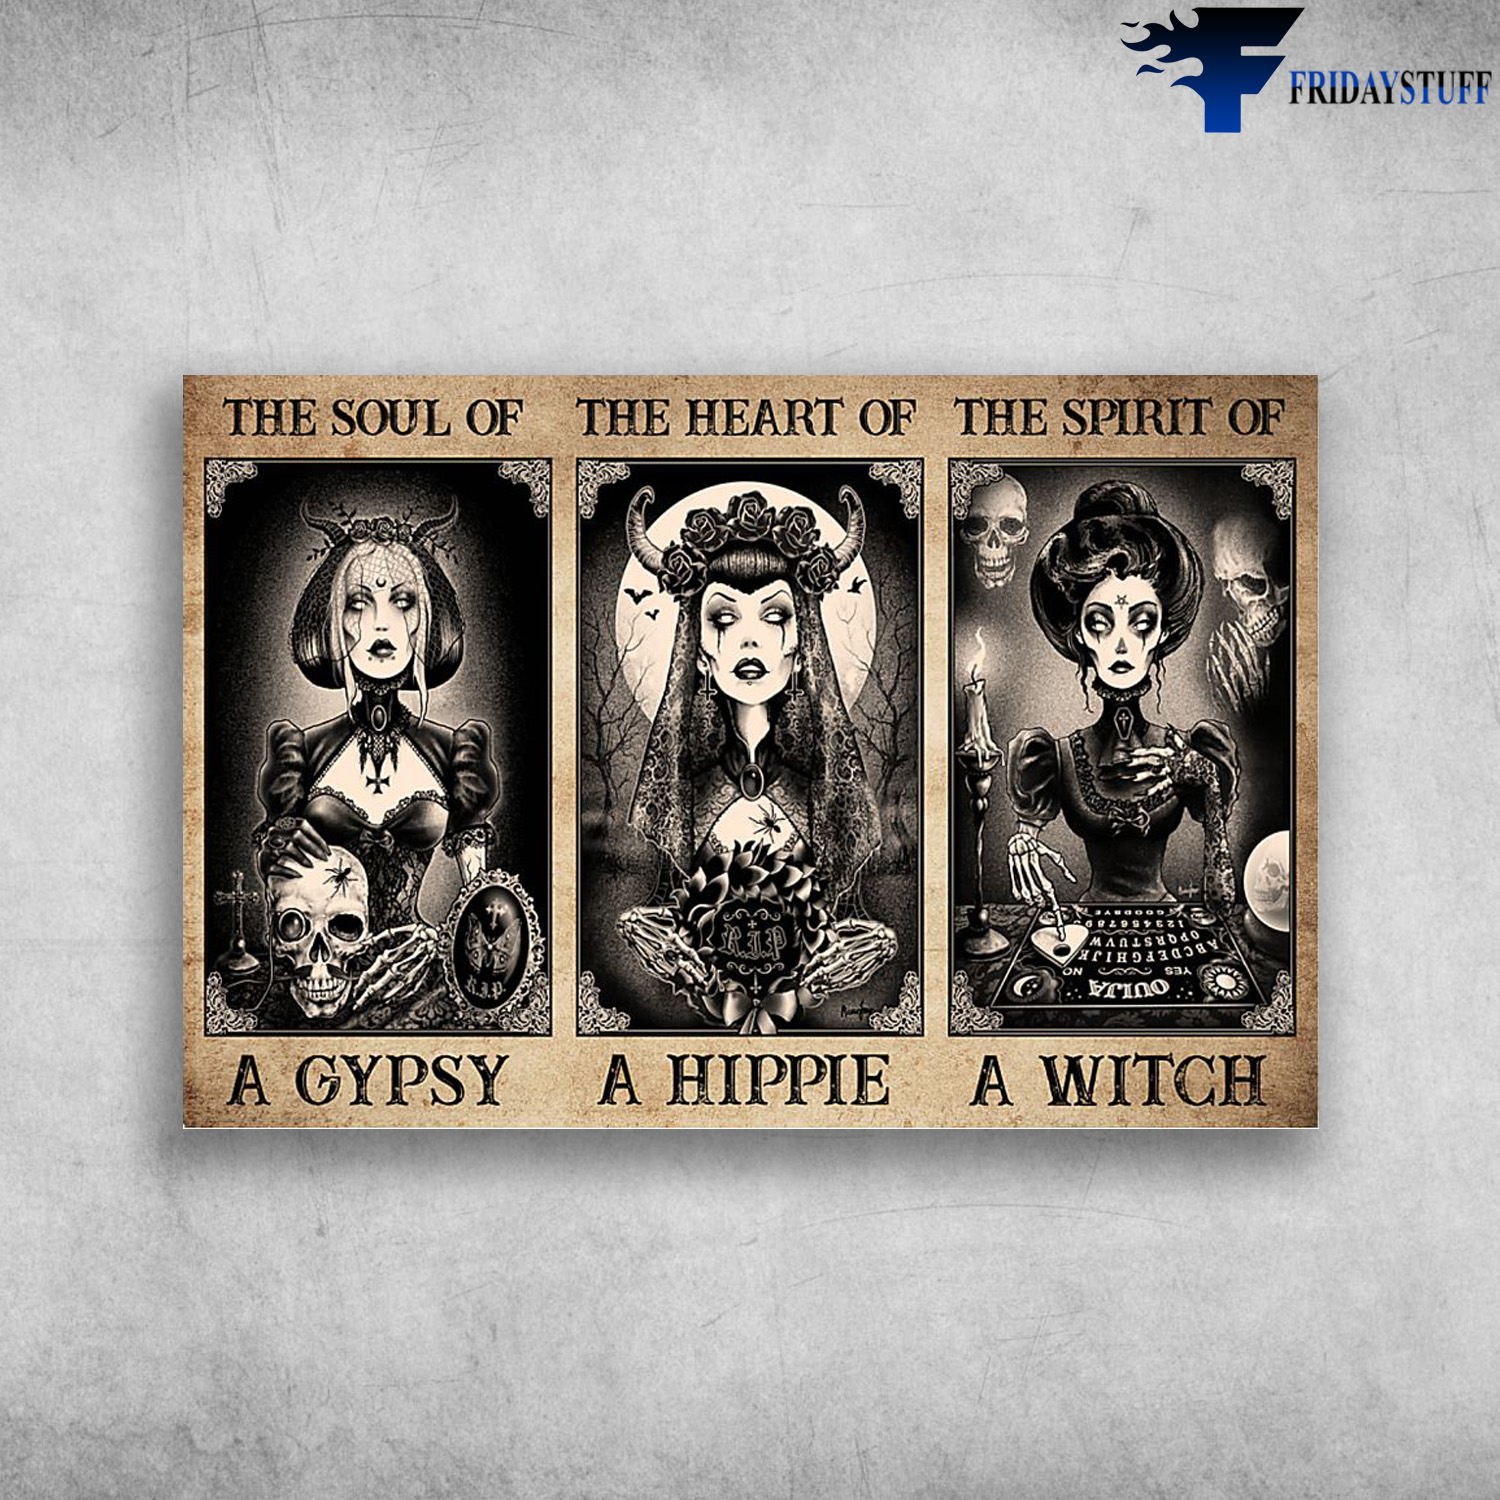 The Gypsy, Hippie And Witch - The Soul Of A Gypsy, The Heart Of A Hippie, The Spirit Of A Witch